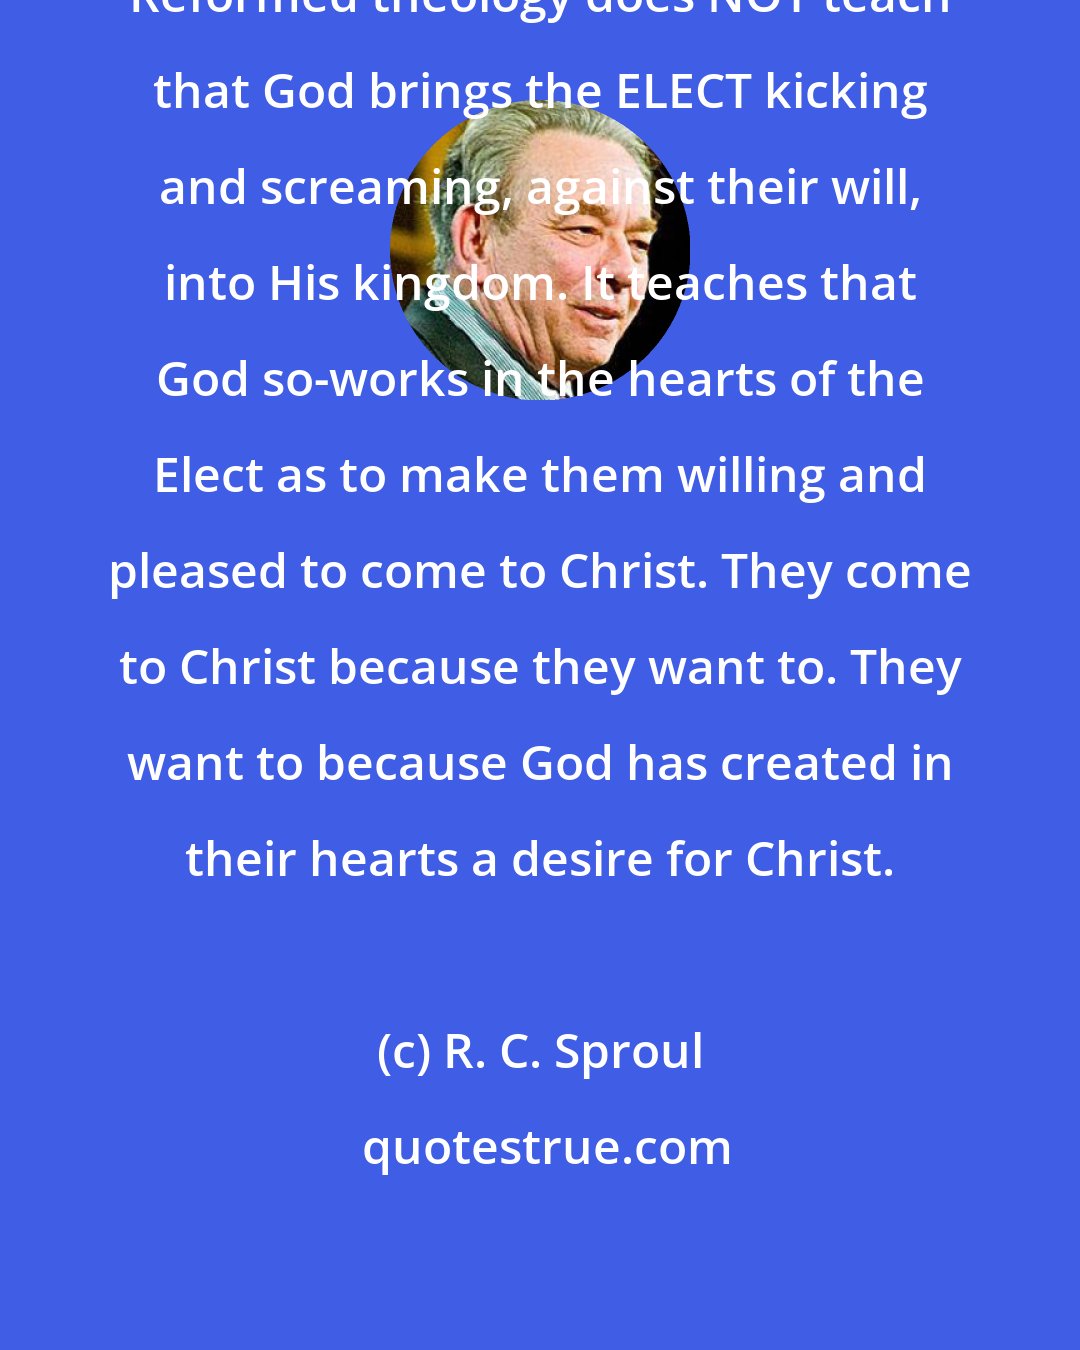 R. C. Sproul: Reformed theology does NOT teach that God brings the ELECT kicking and screaming, against their will, into His kingdom. It teaches that God so-works in the hearts of the Elect as to make them willing and pleased to come to Christ. They come to Christ because they want to. They want to because God has created in their hearts a desire for Christ.